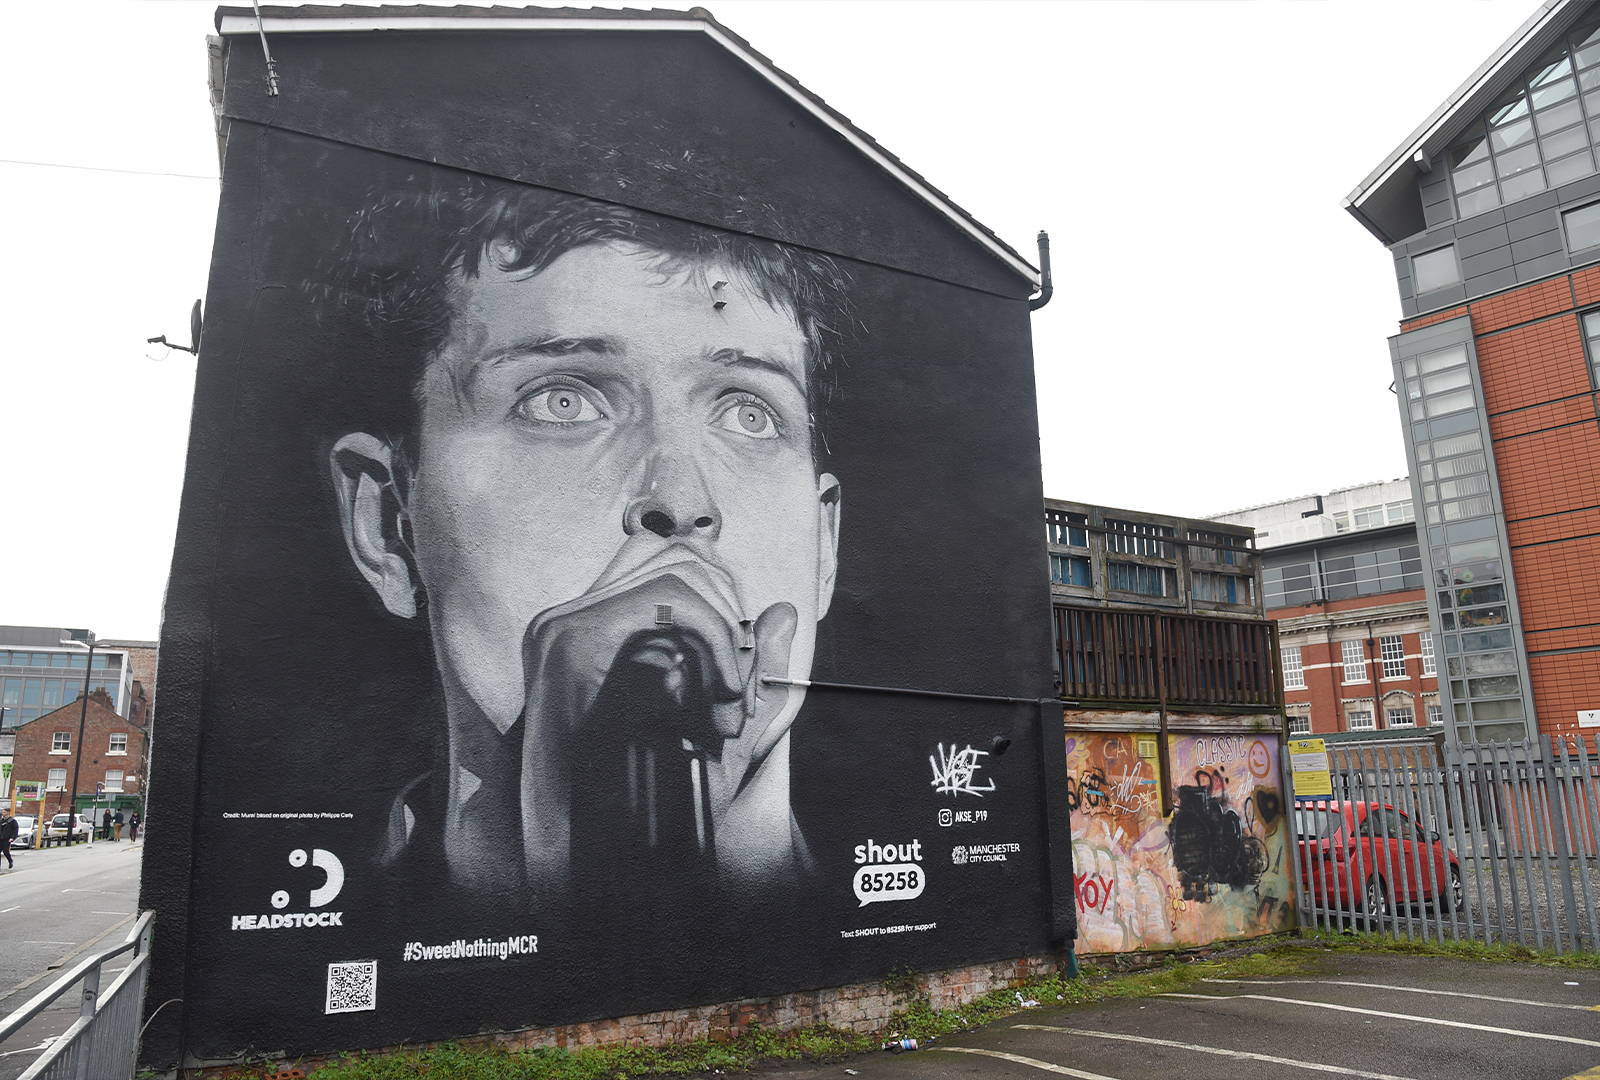 An Ian Curtis mural in Manchester has been painted over with an advert